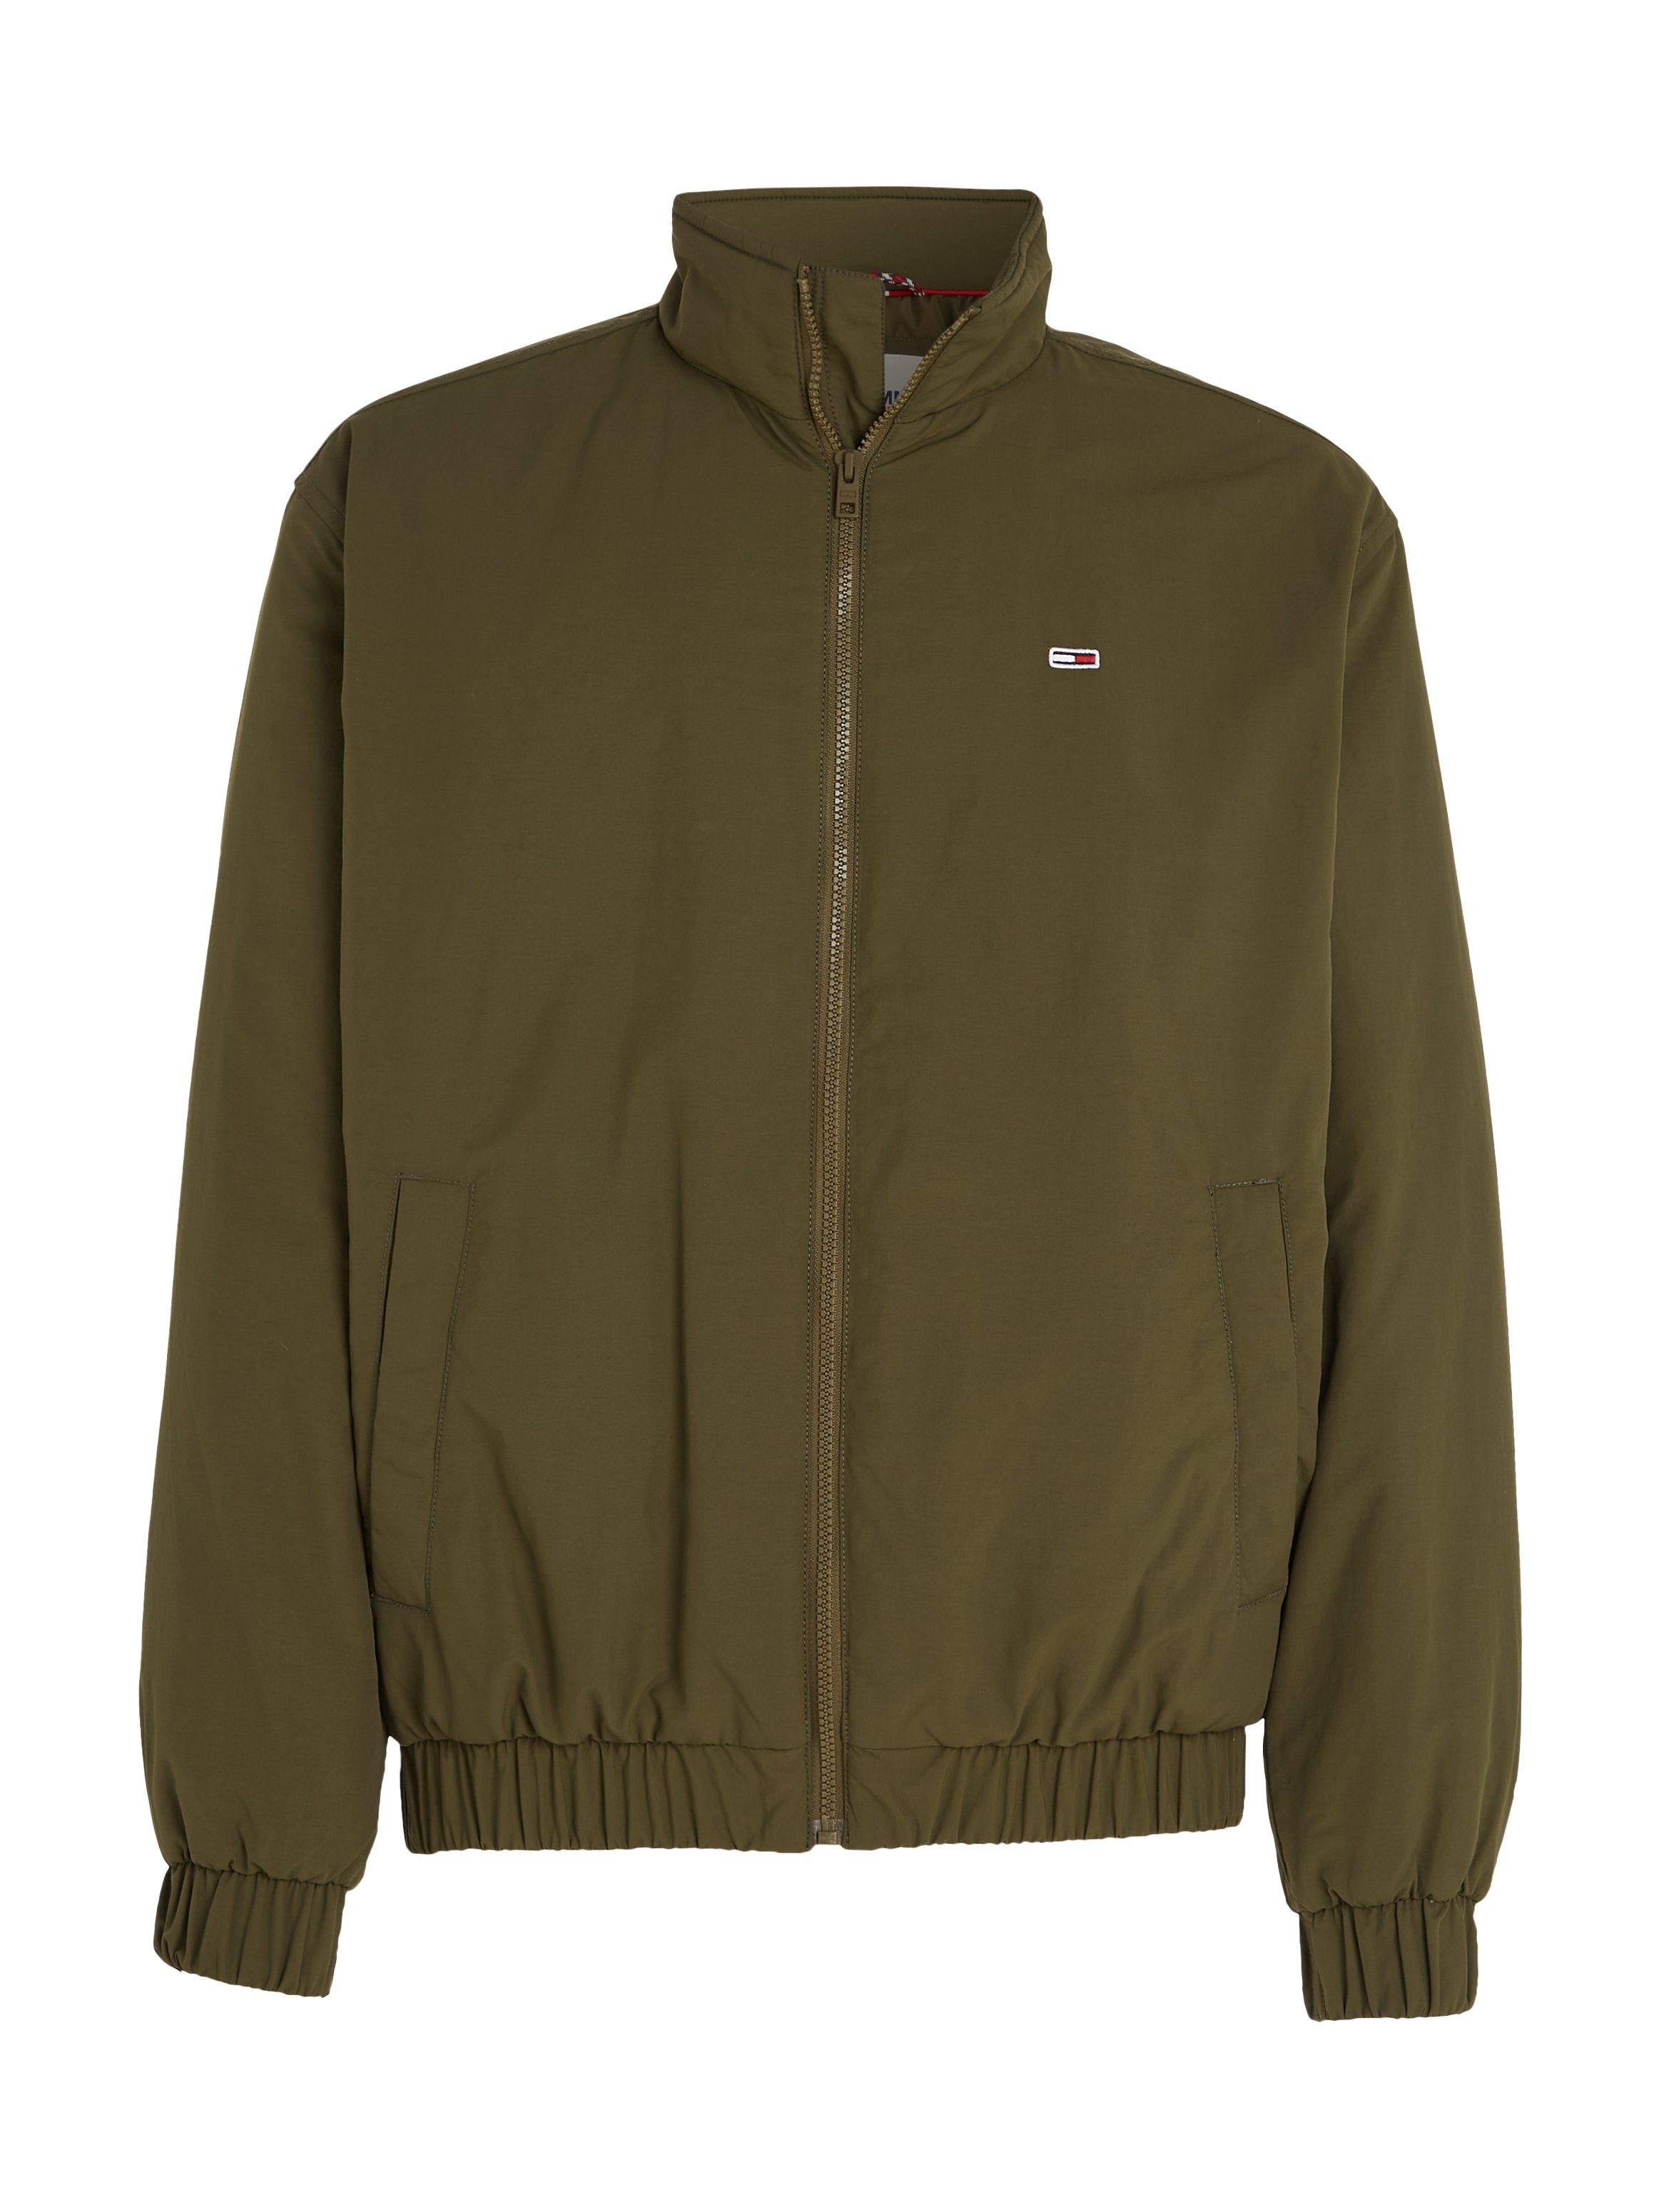 Tommy Jeans Blouson TJM ESSENTIAL PADDED Green JACKET Olive Drab